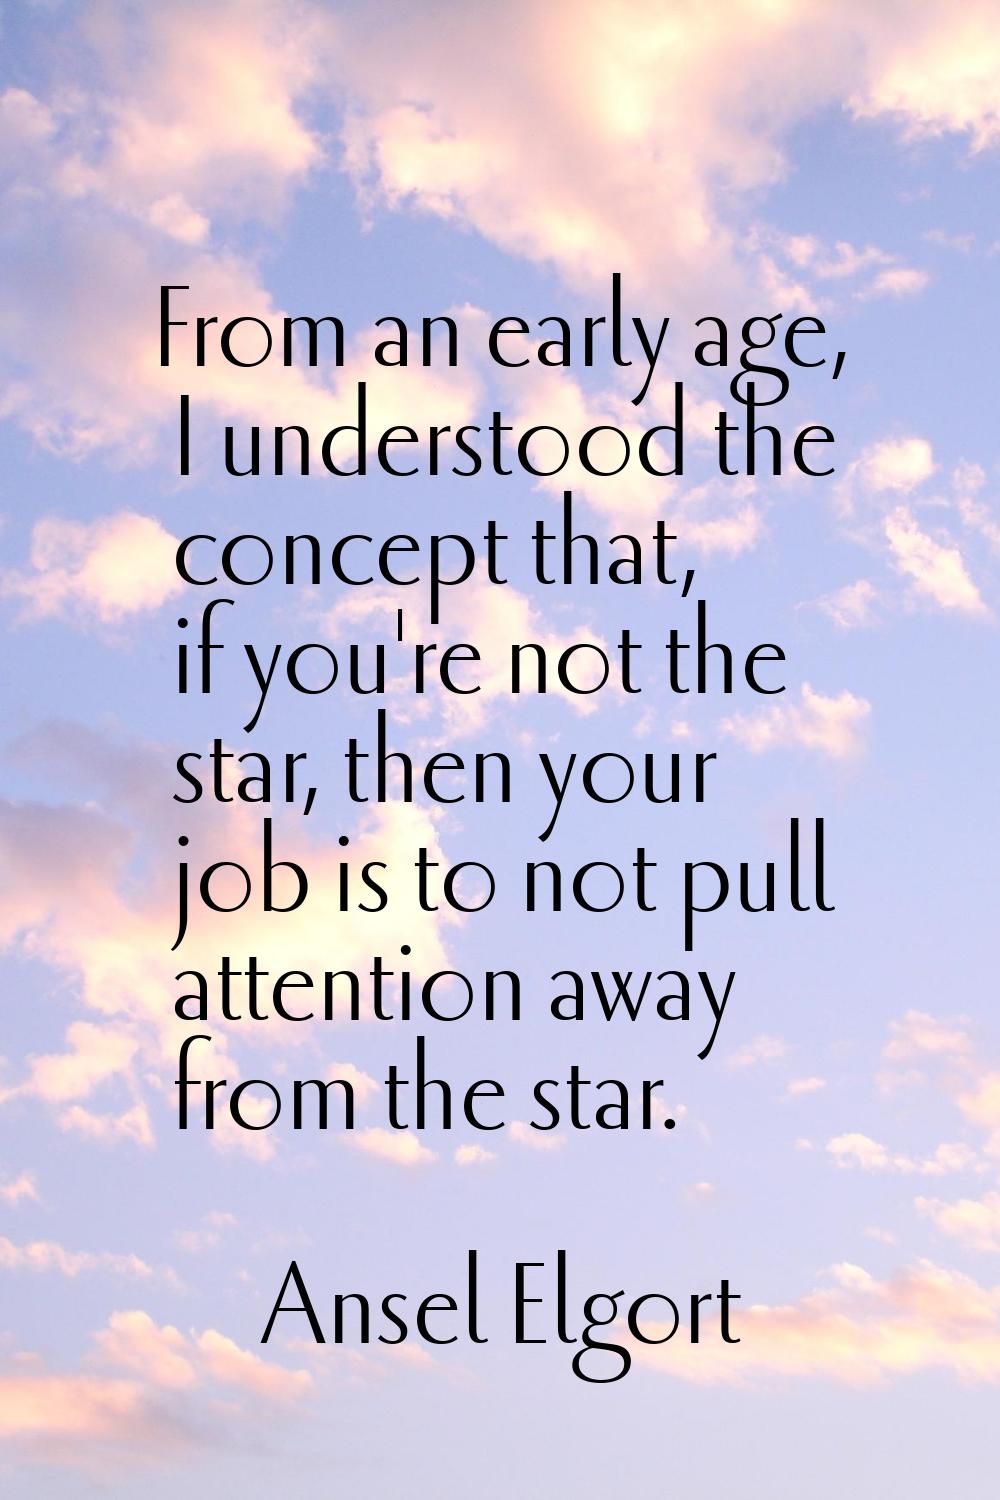 From an early age, I understood the concept that, if you're not the star, then your job is to not p